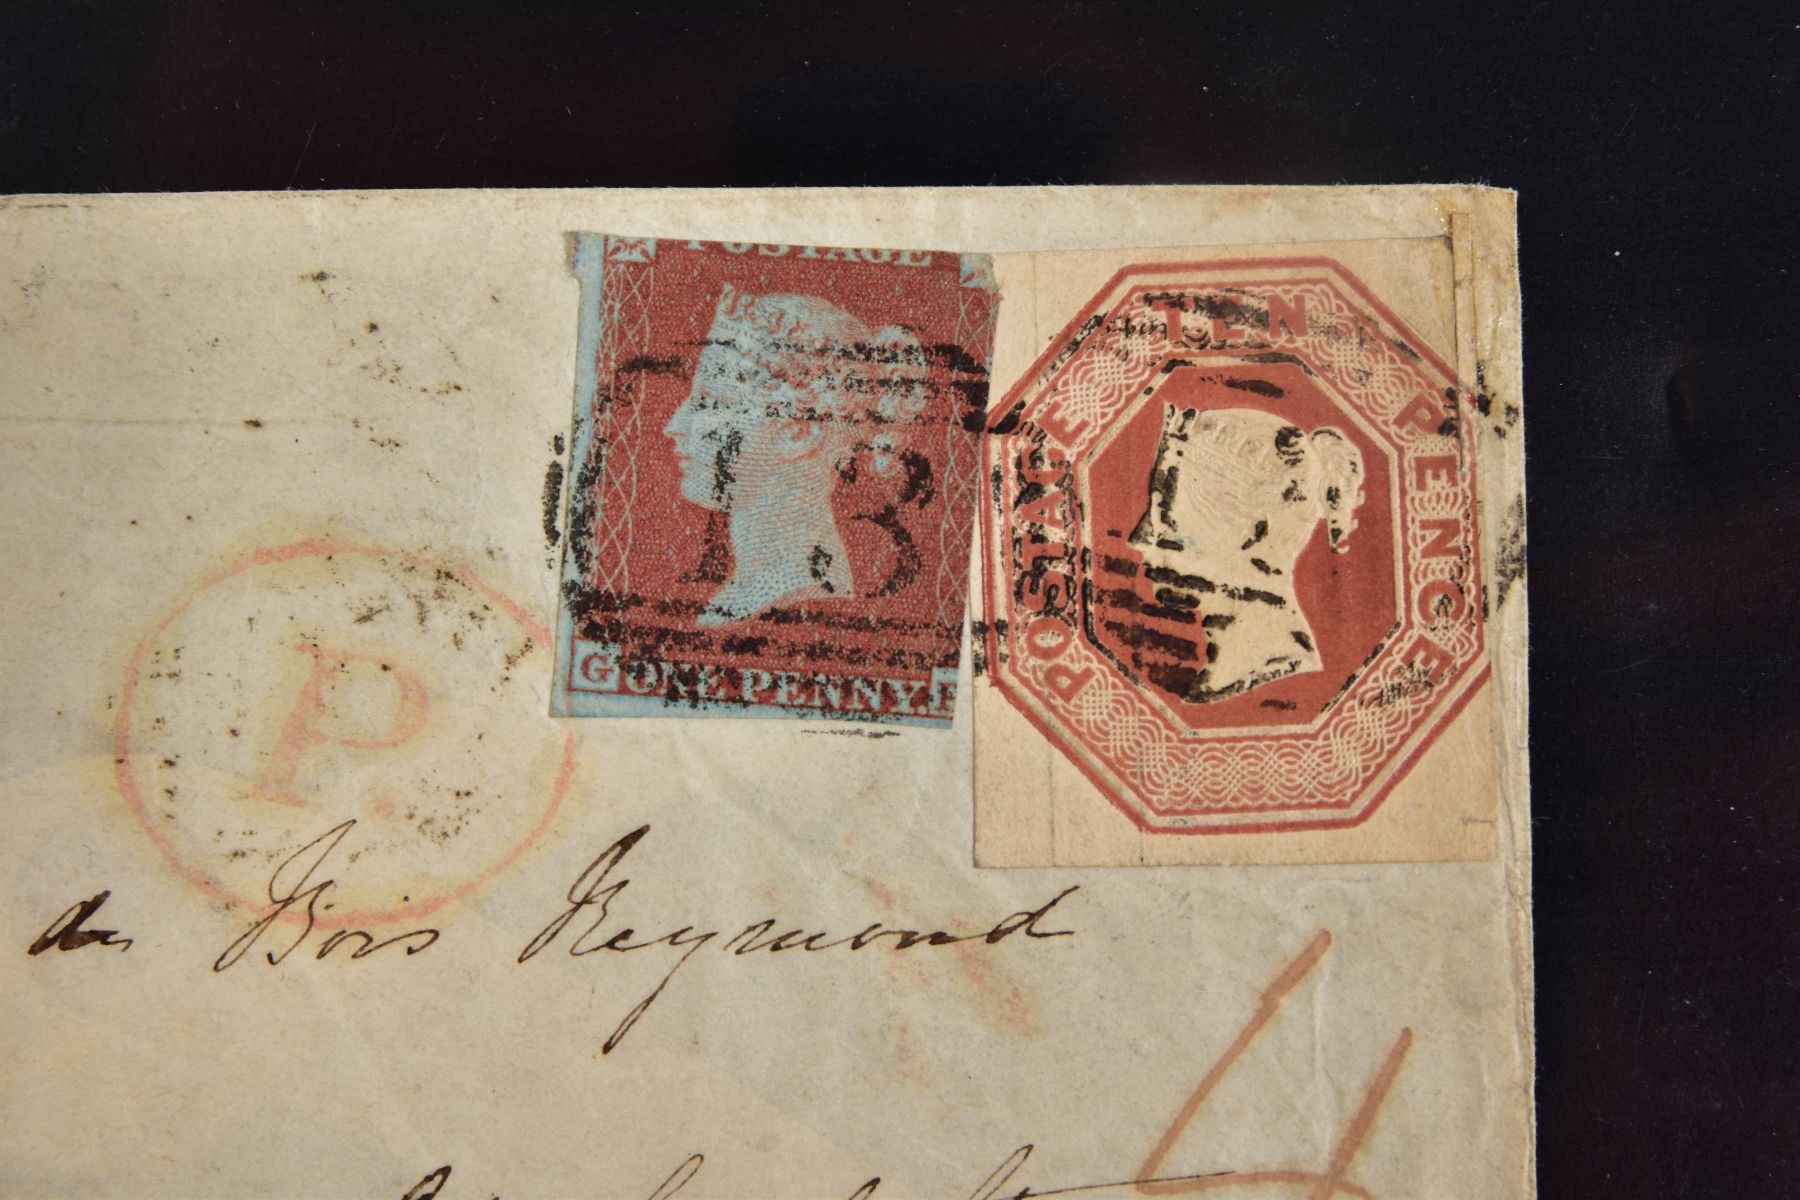 GB 1848 10d EMBOSSED on cover to Berlin, cut into at right - Image 4 of 4